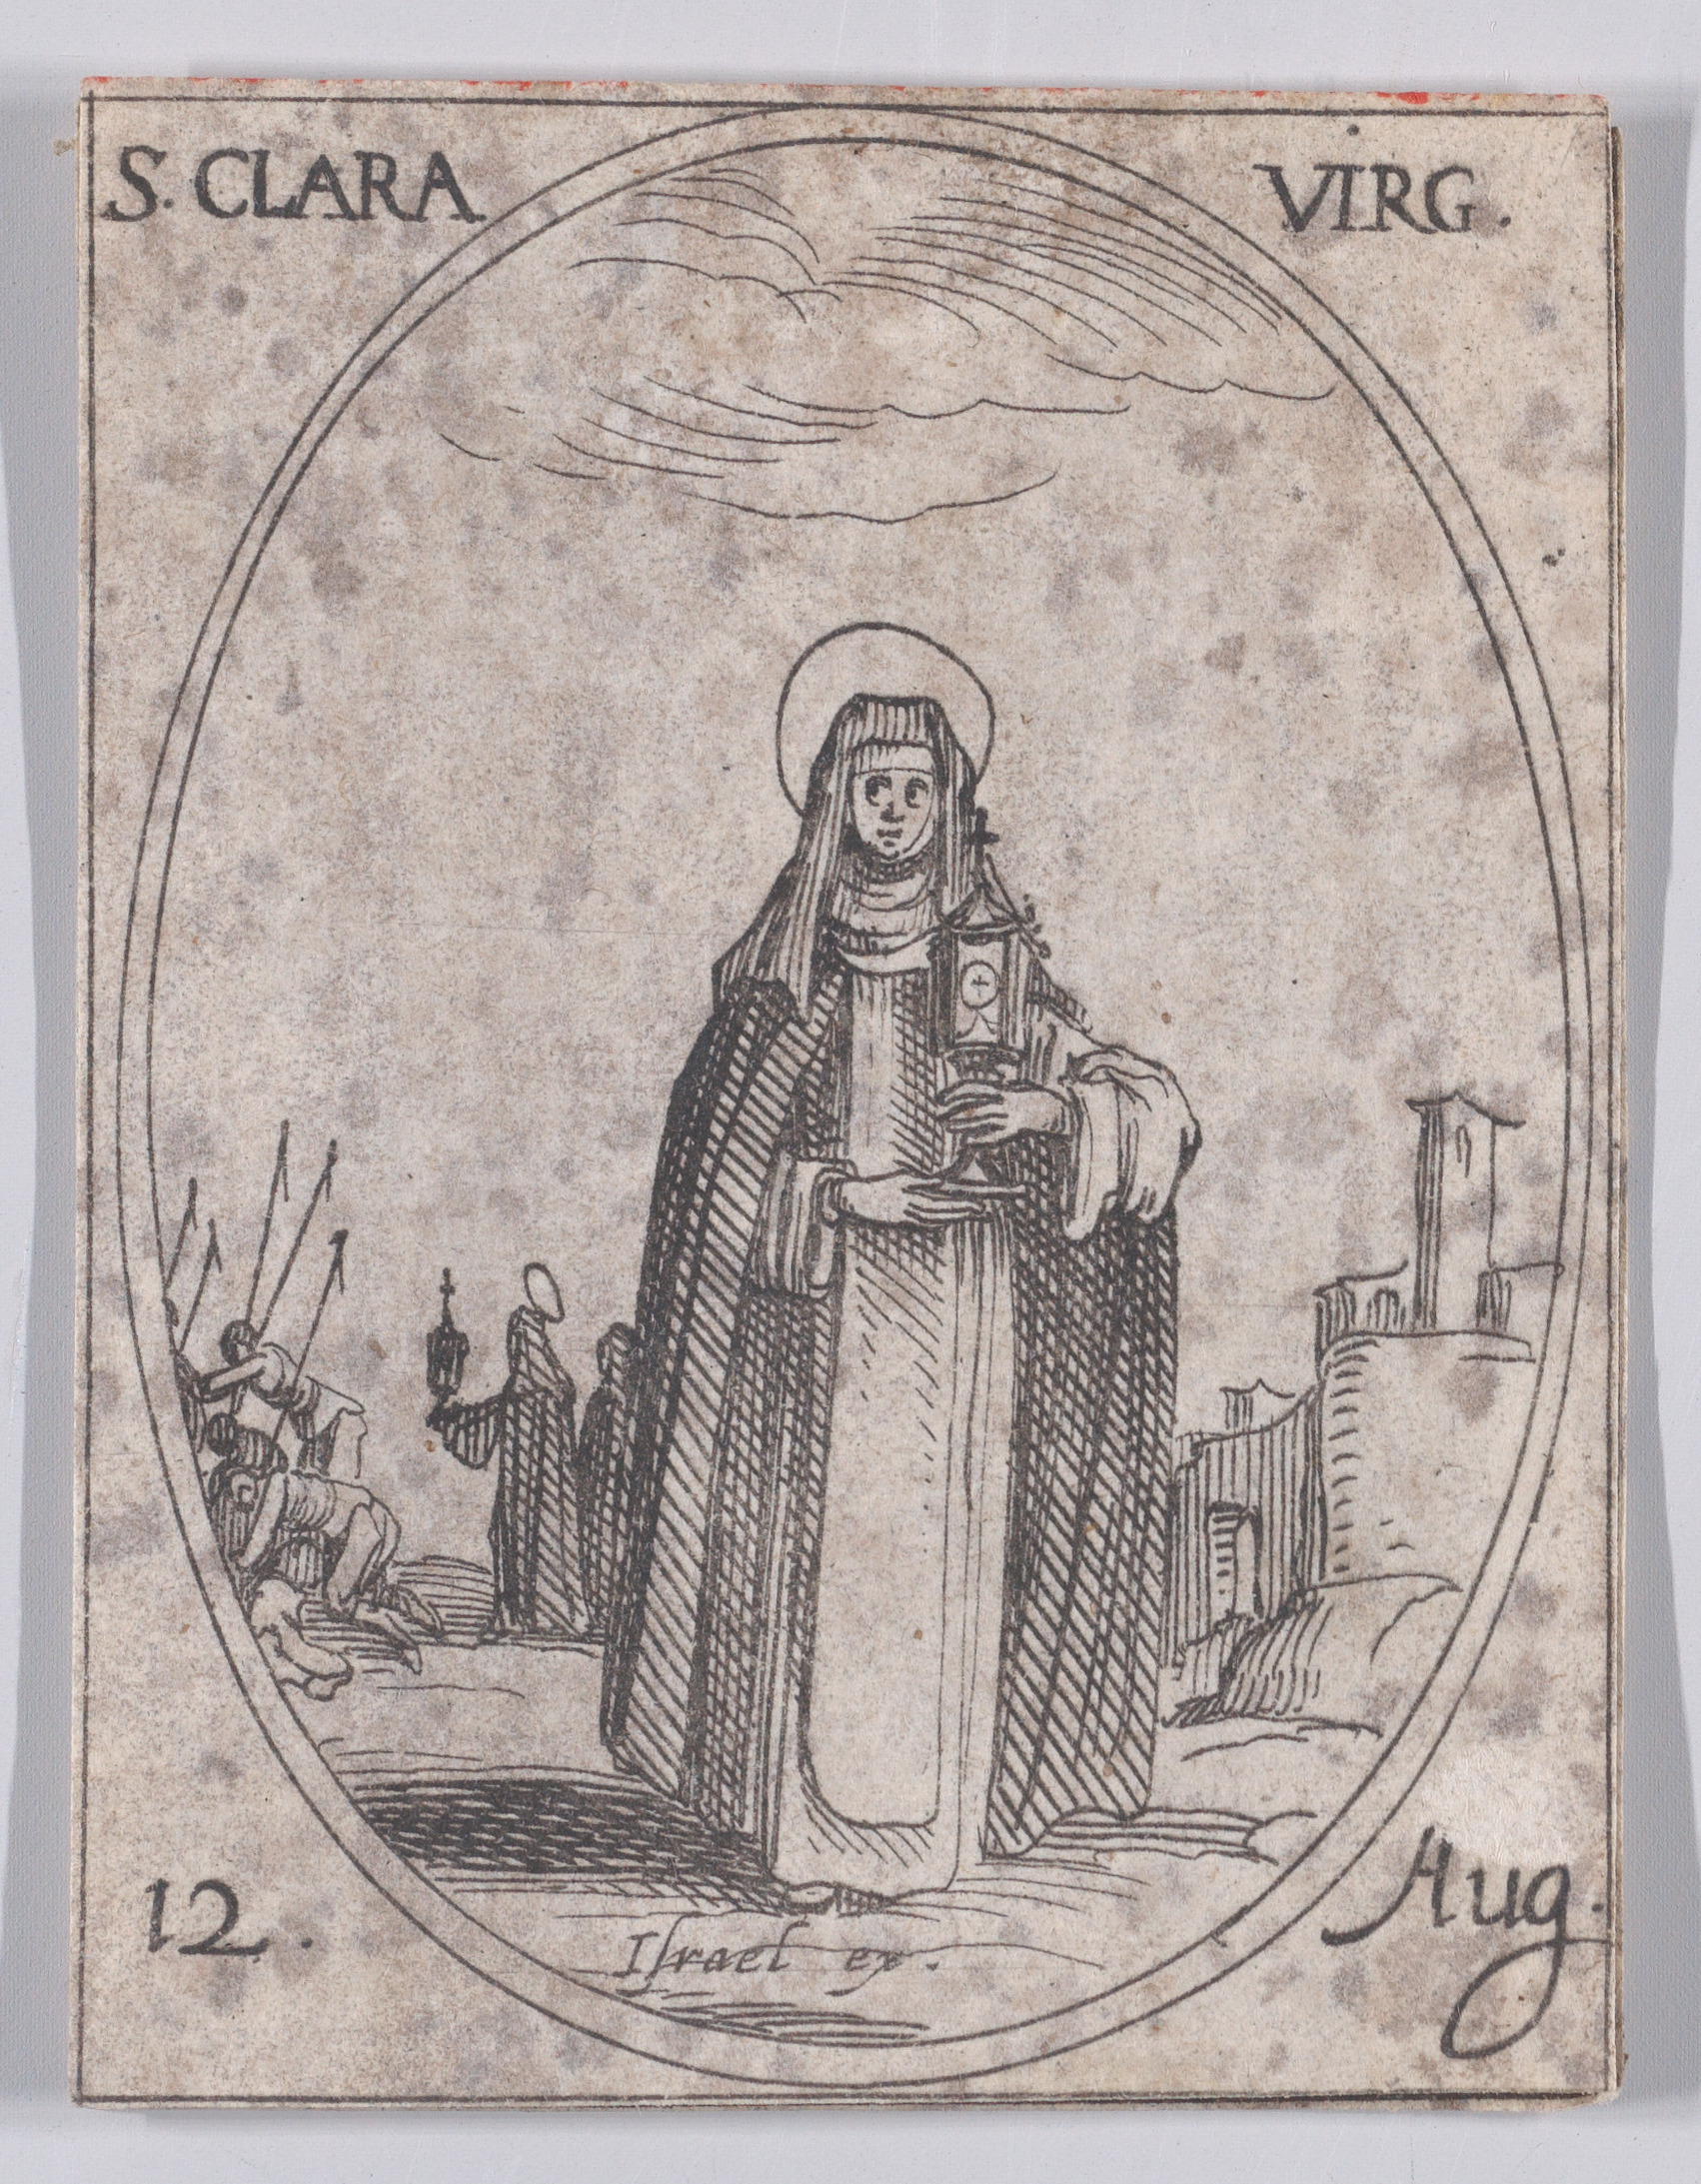 Ste. Claire, vierge (St. Clare, Virgin), August 12th, from Les Images De Tous Les Saincts et Saintes de L'Année (Images of All of the Saints and Religious Events of the Year), Jacques Callot (French, Nancy 1592–1635 Nancy), Etching; second state of two (Lieure)